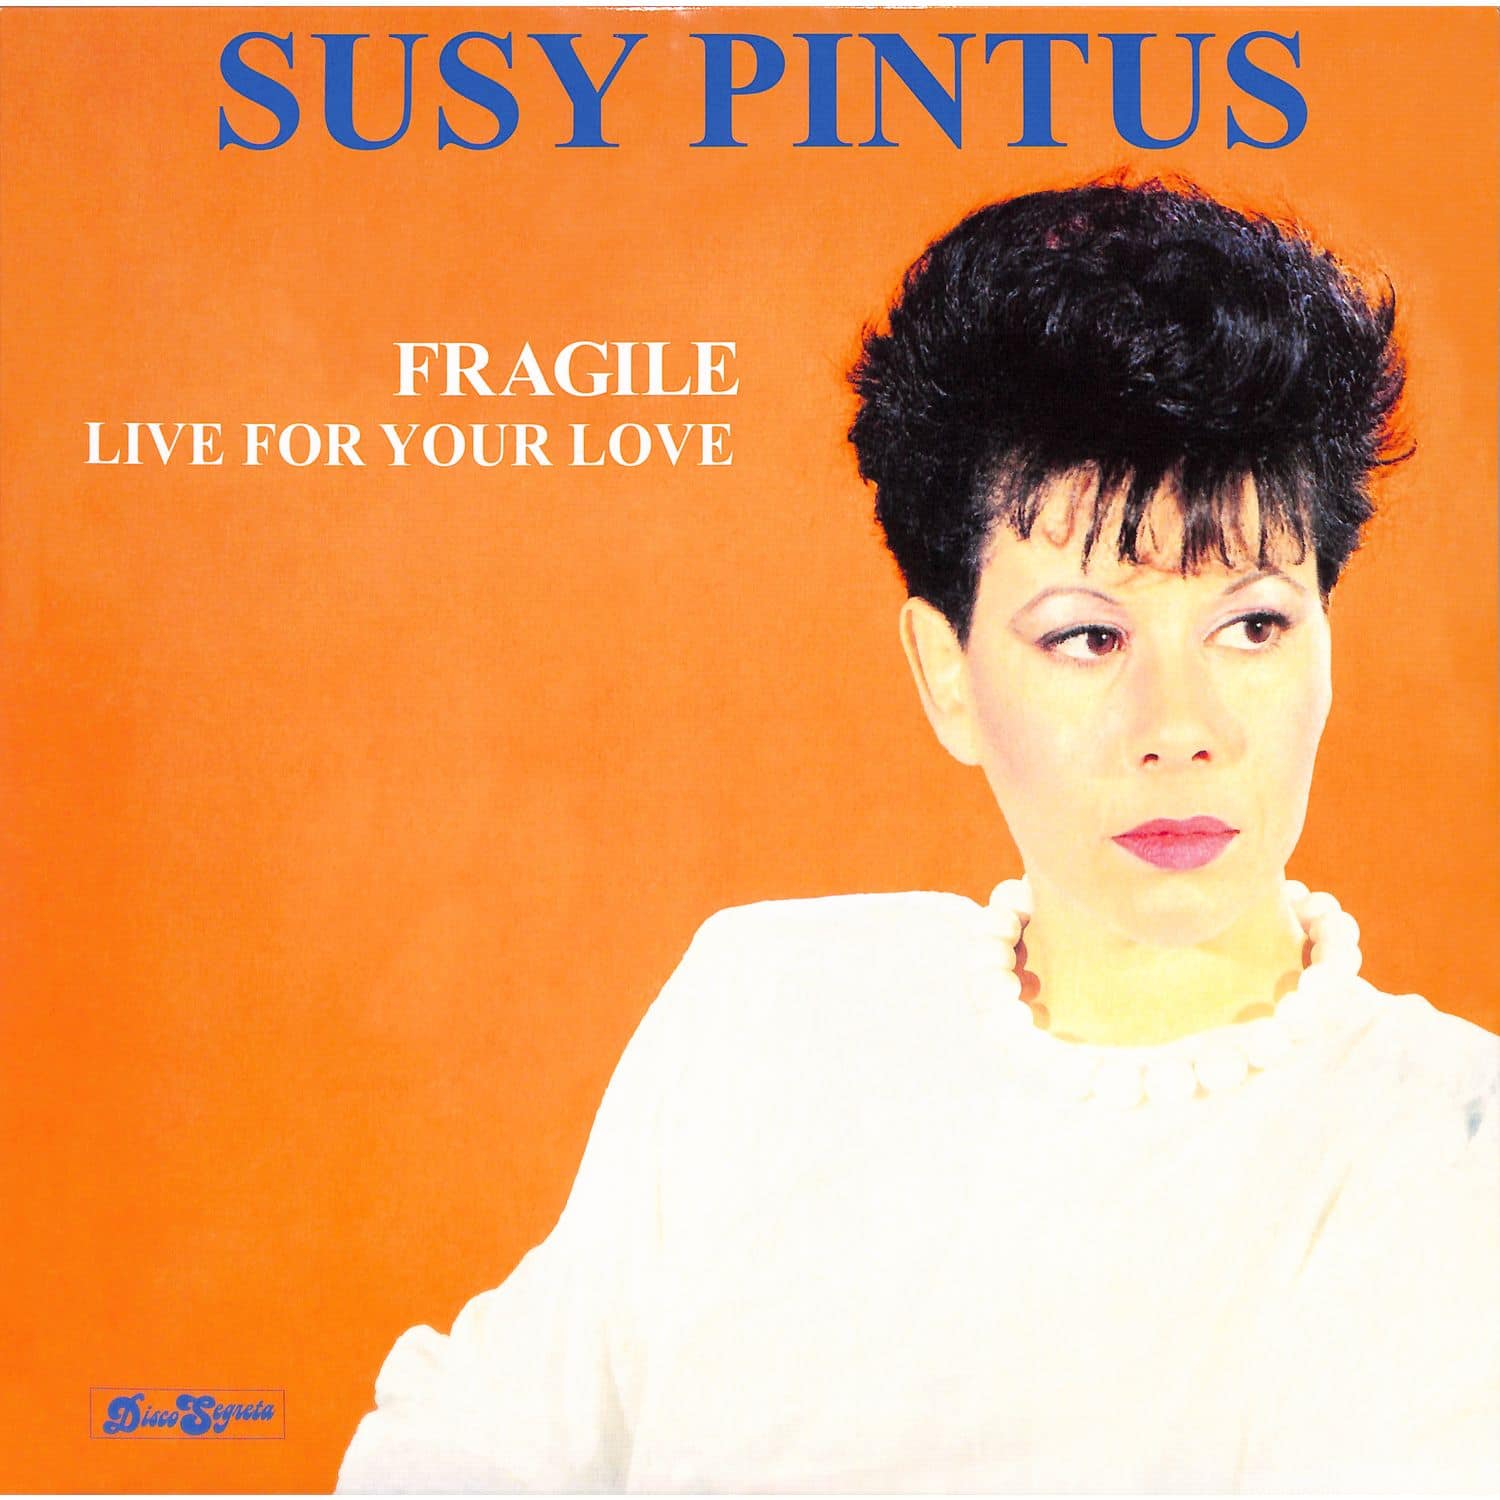 Susy Pintus - FRAGILE / LIVE FOR YOUR LOVE